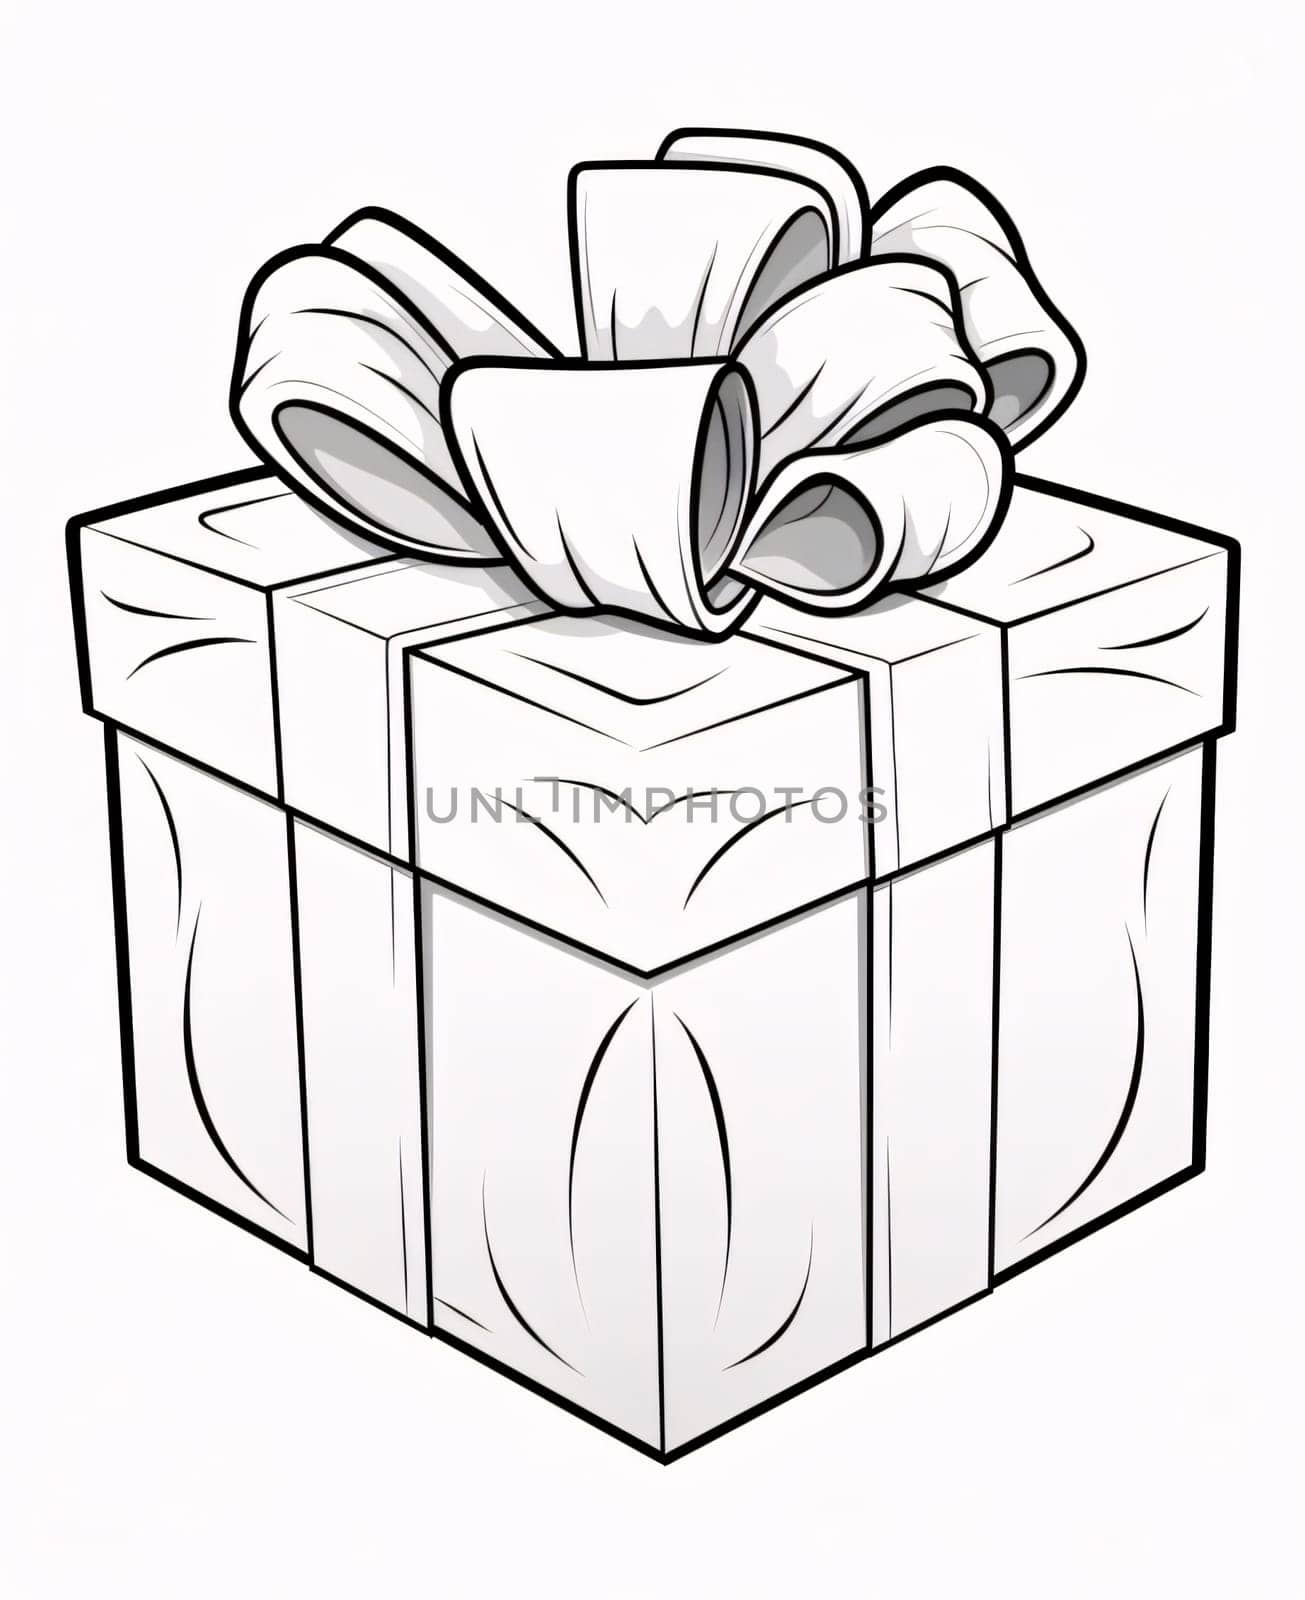 Black and white coloring card, gift, box with a bow. Gifts as a day symbol of present and love. by ThemesS